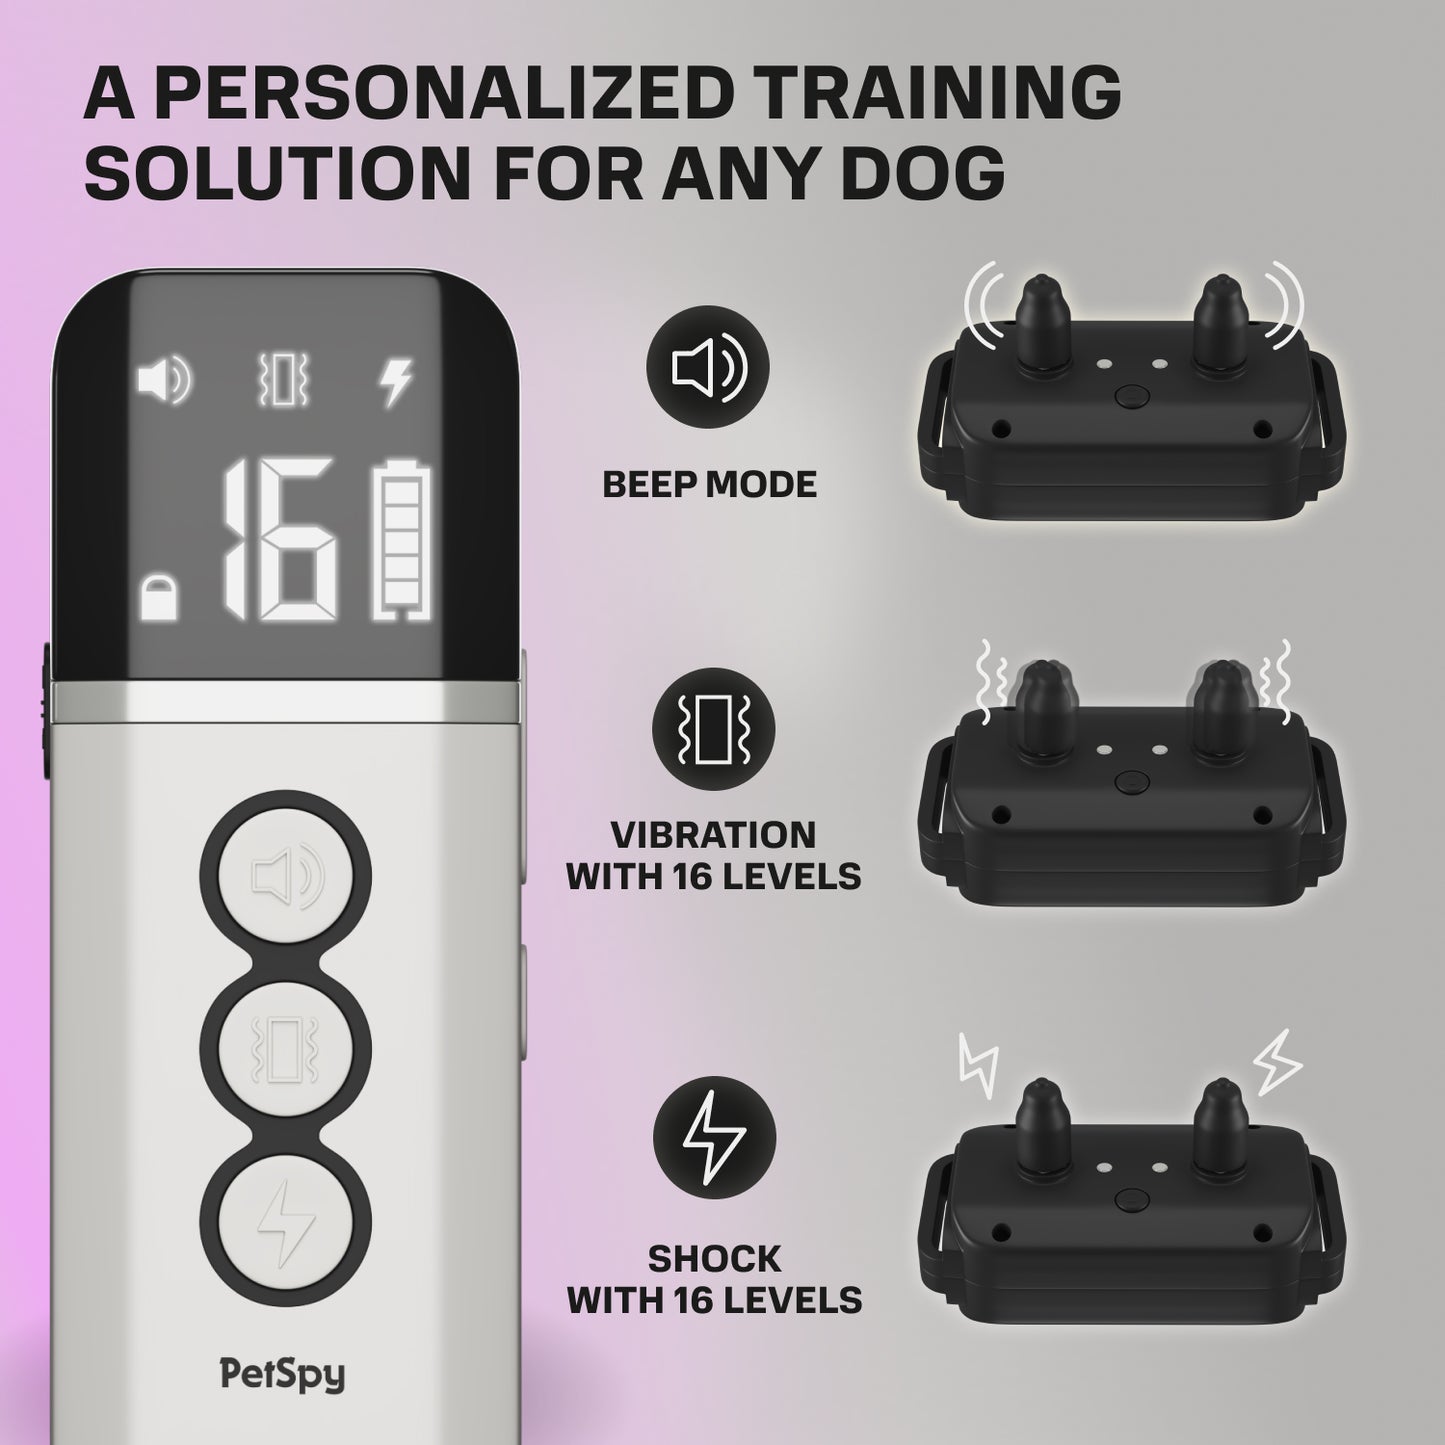 N20 Shock collar for dogs_a personalized training solution for any dog